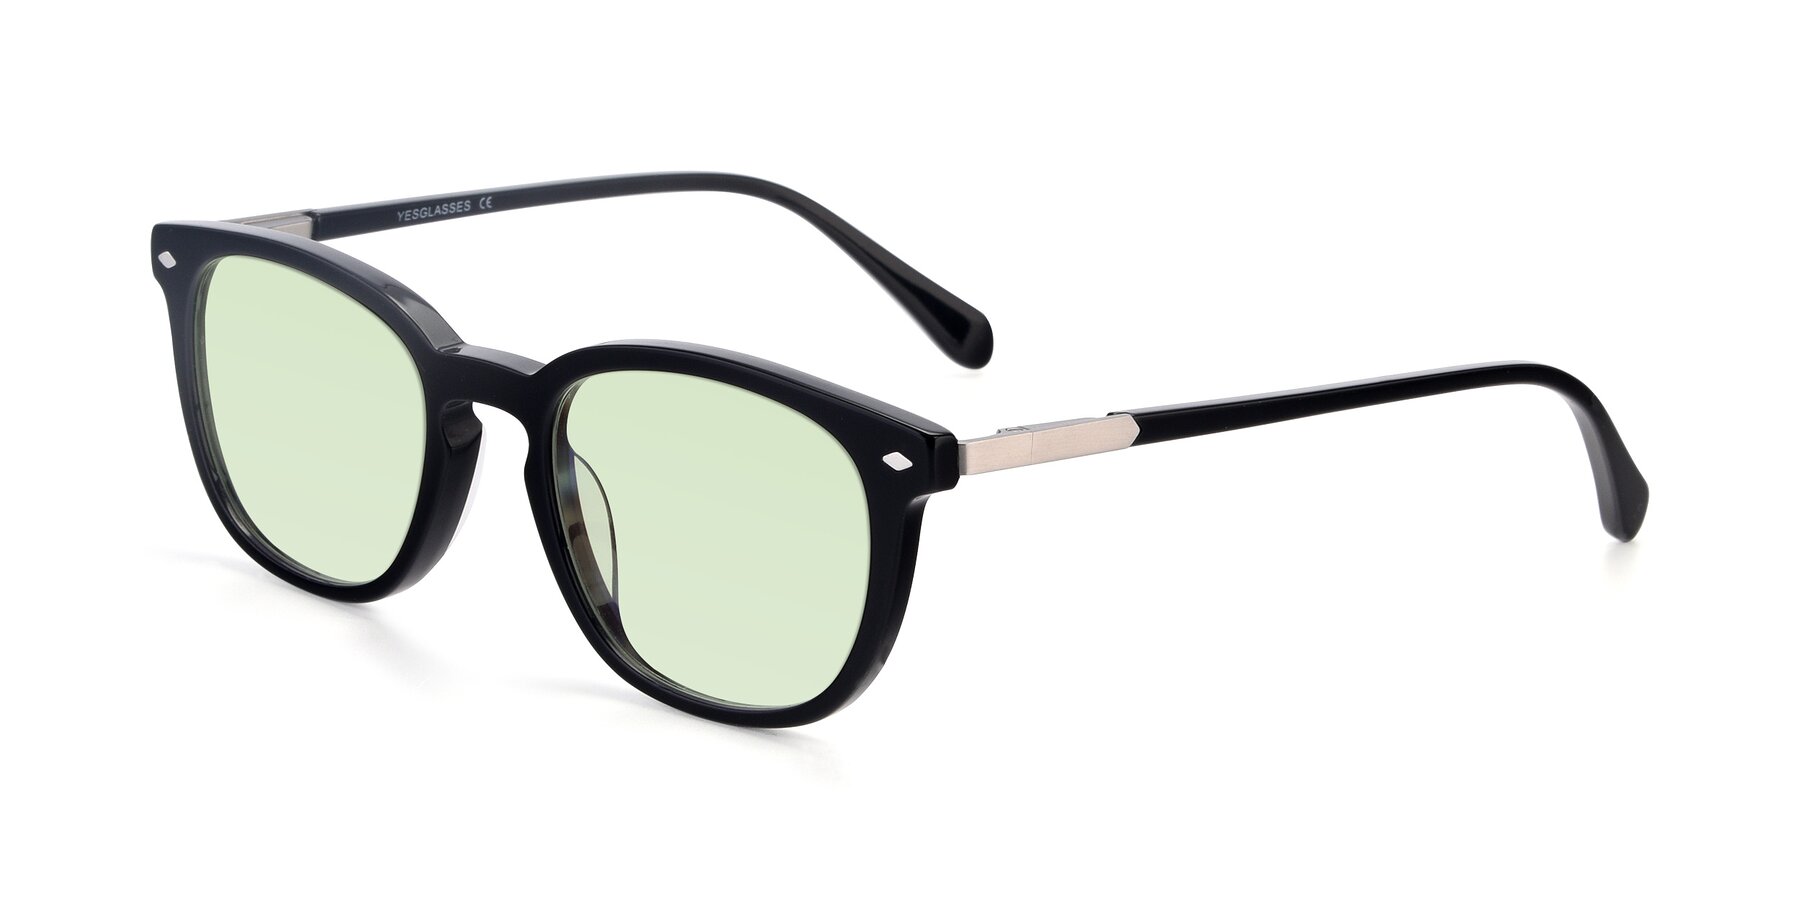 Angle of 17578 in Black with Light Green Tinted Lenses